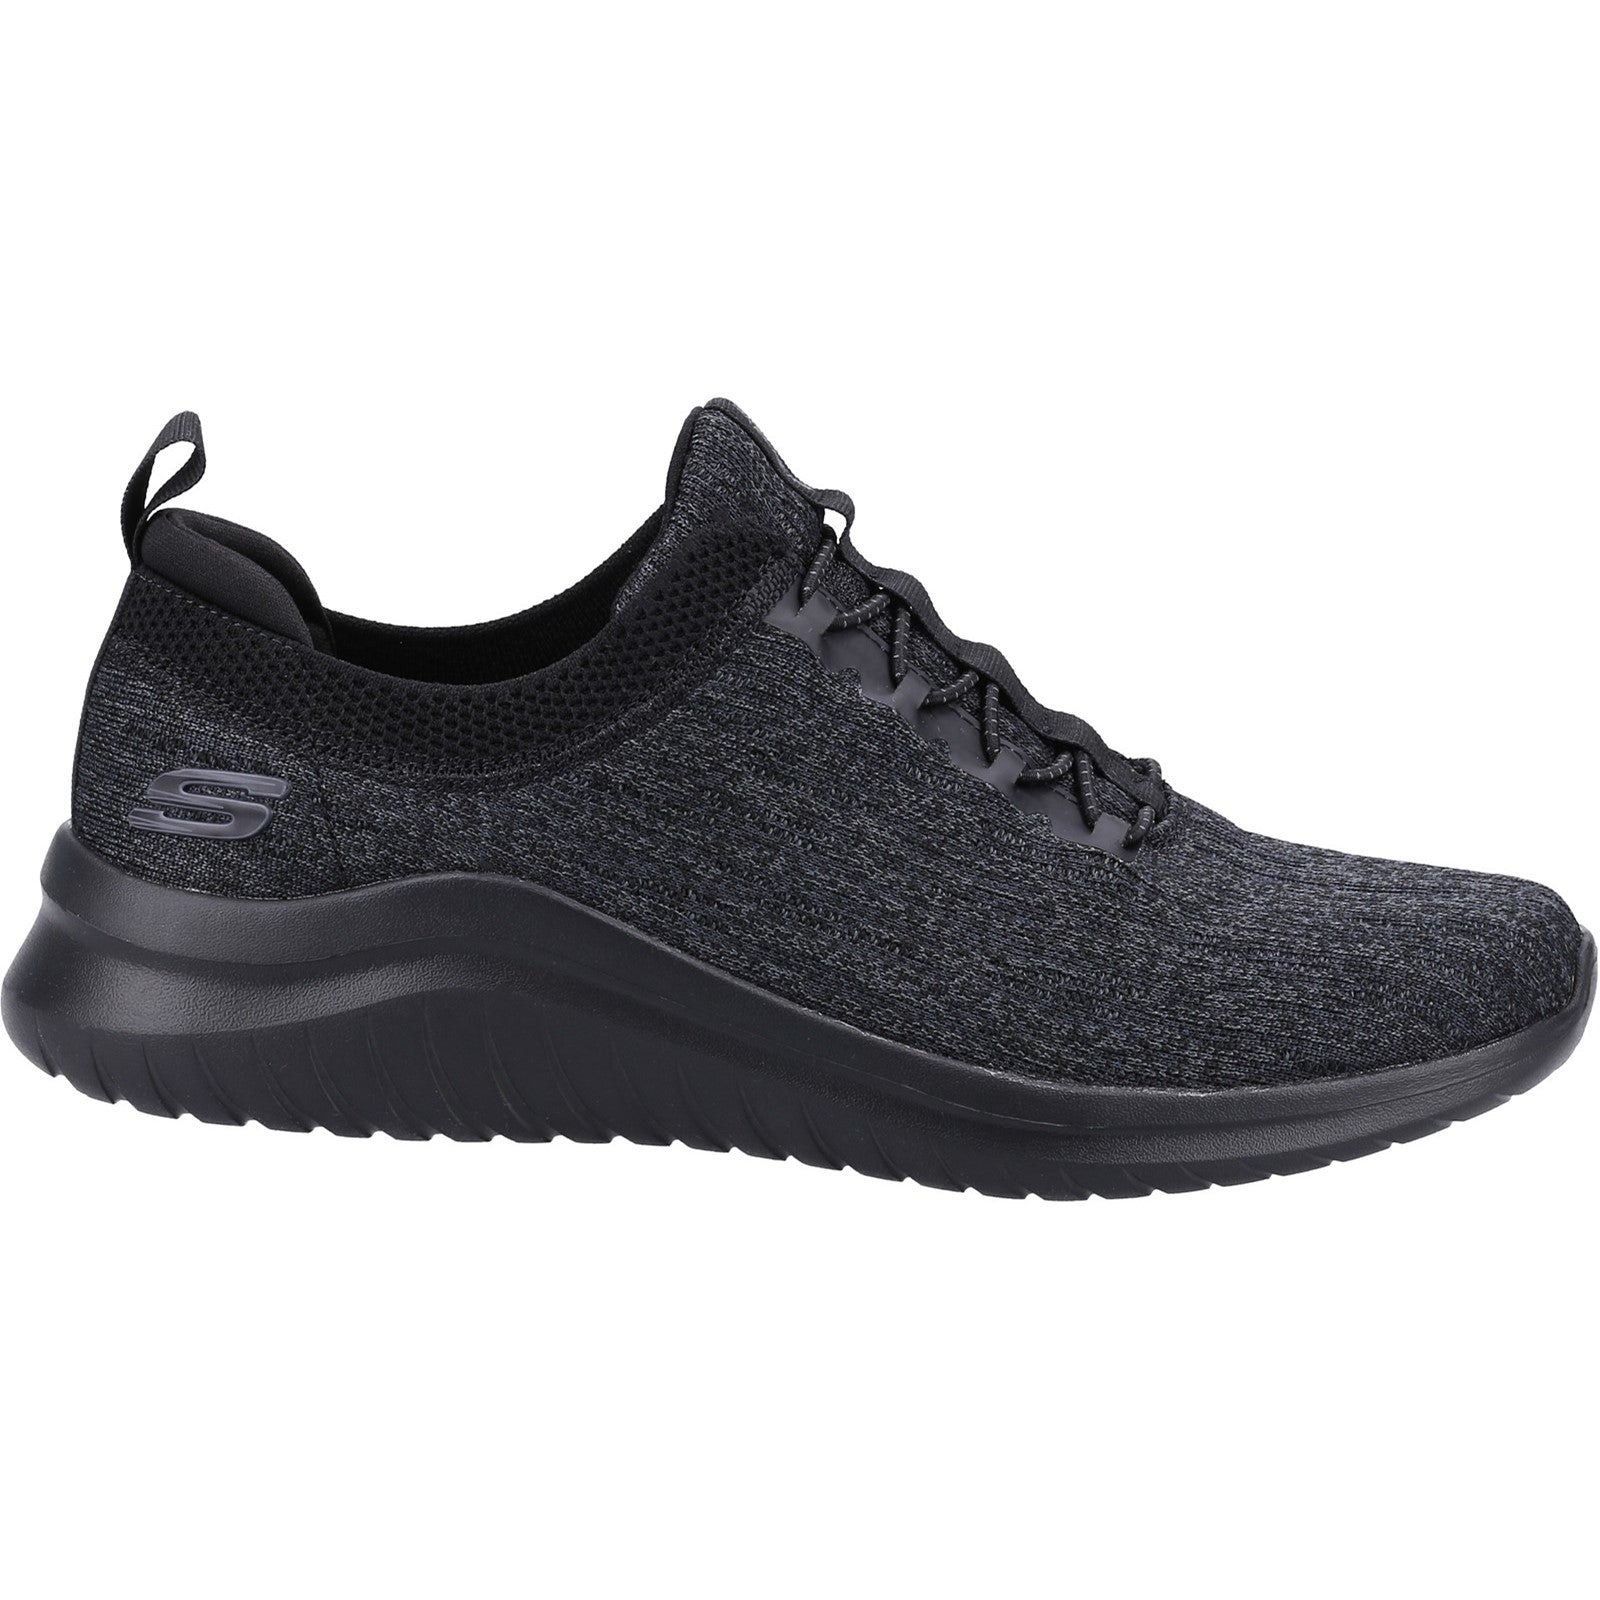 Skechers Mens Ultra Flex 2.0 Cryptic Trainers - Black